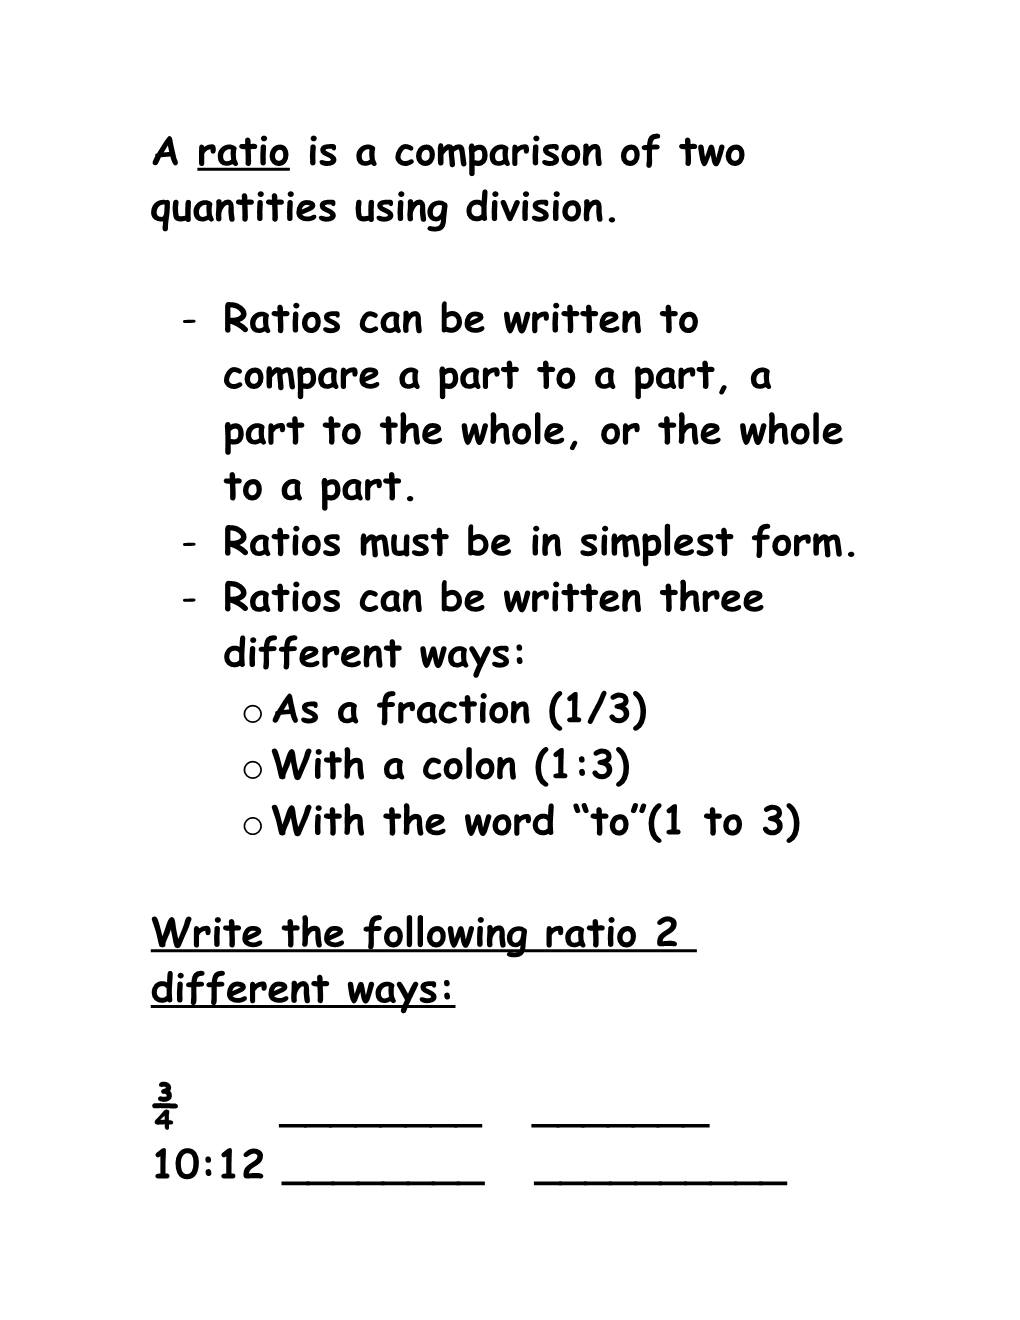 A Ratio Is a Comparison of Two Quantities Using Division